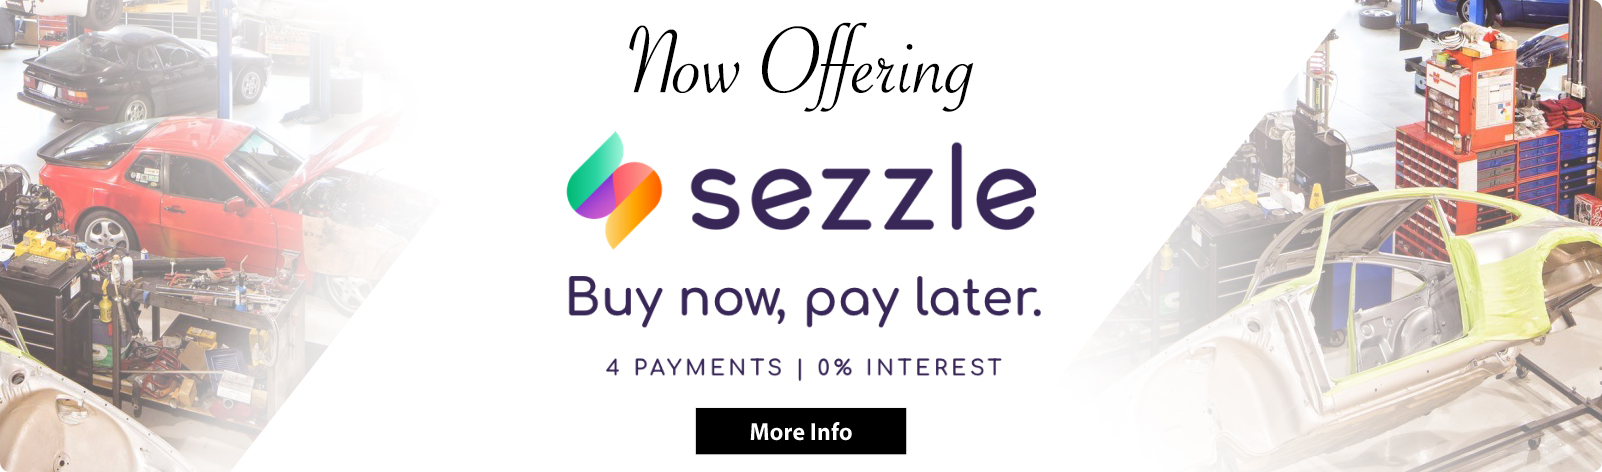 Introducing Sezzle...Buy Now Pay Later!